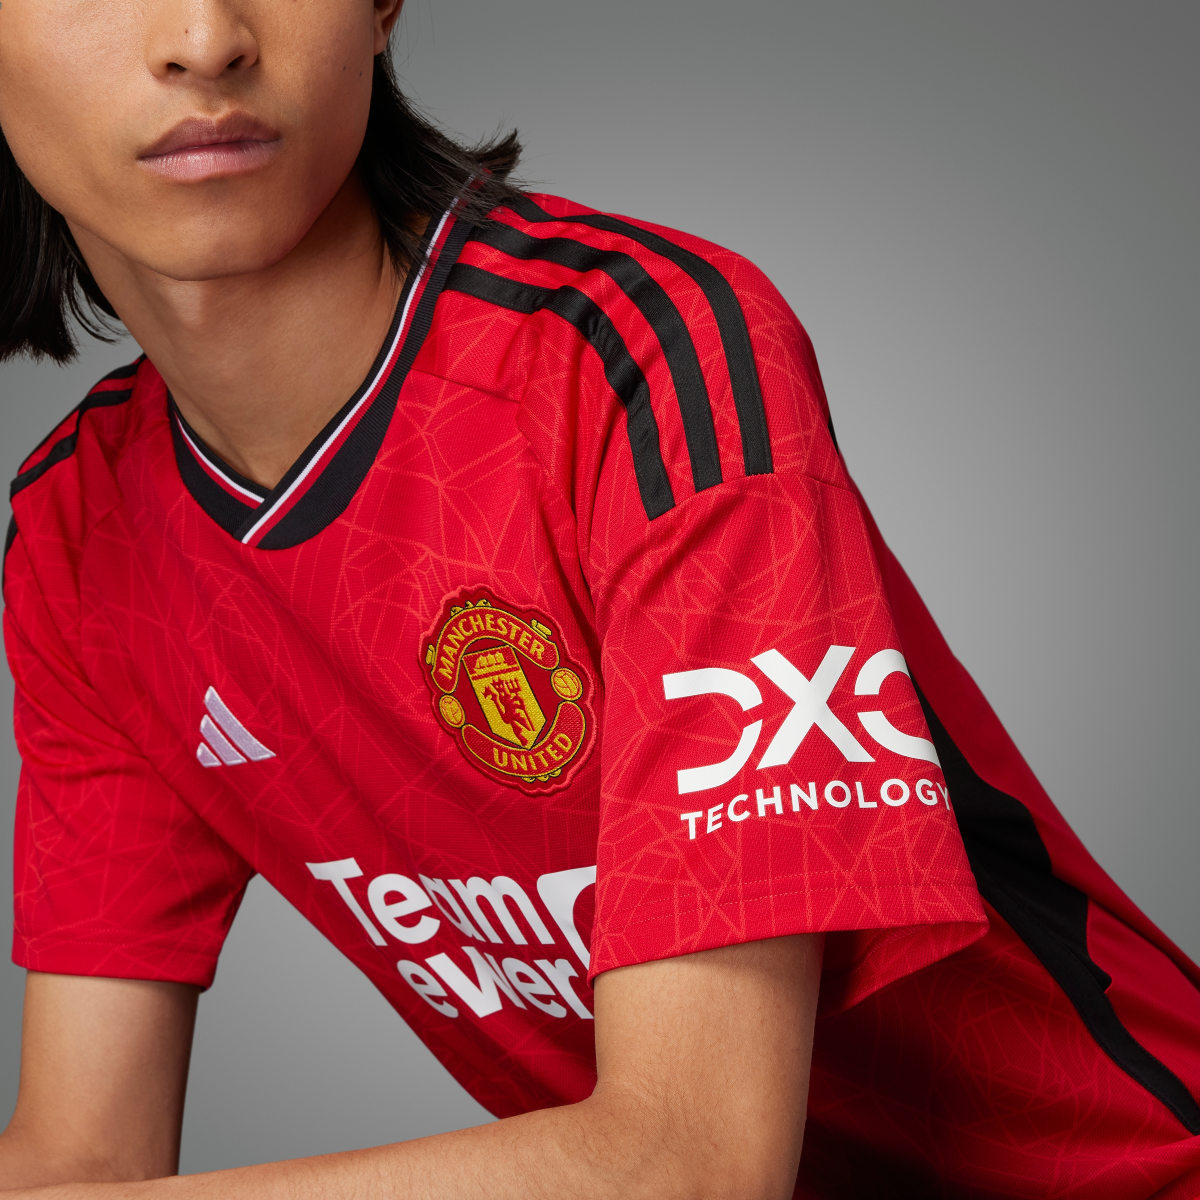 Adidas Jersey Local Manchester United 23/24. 8